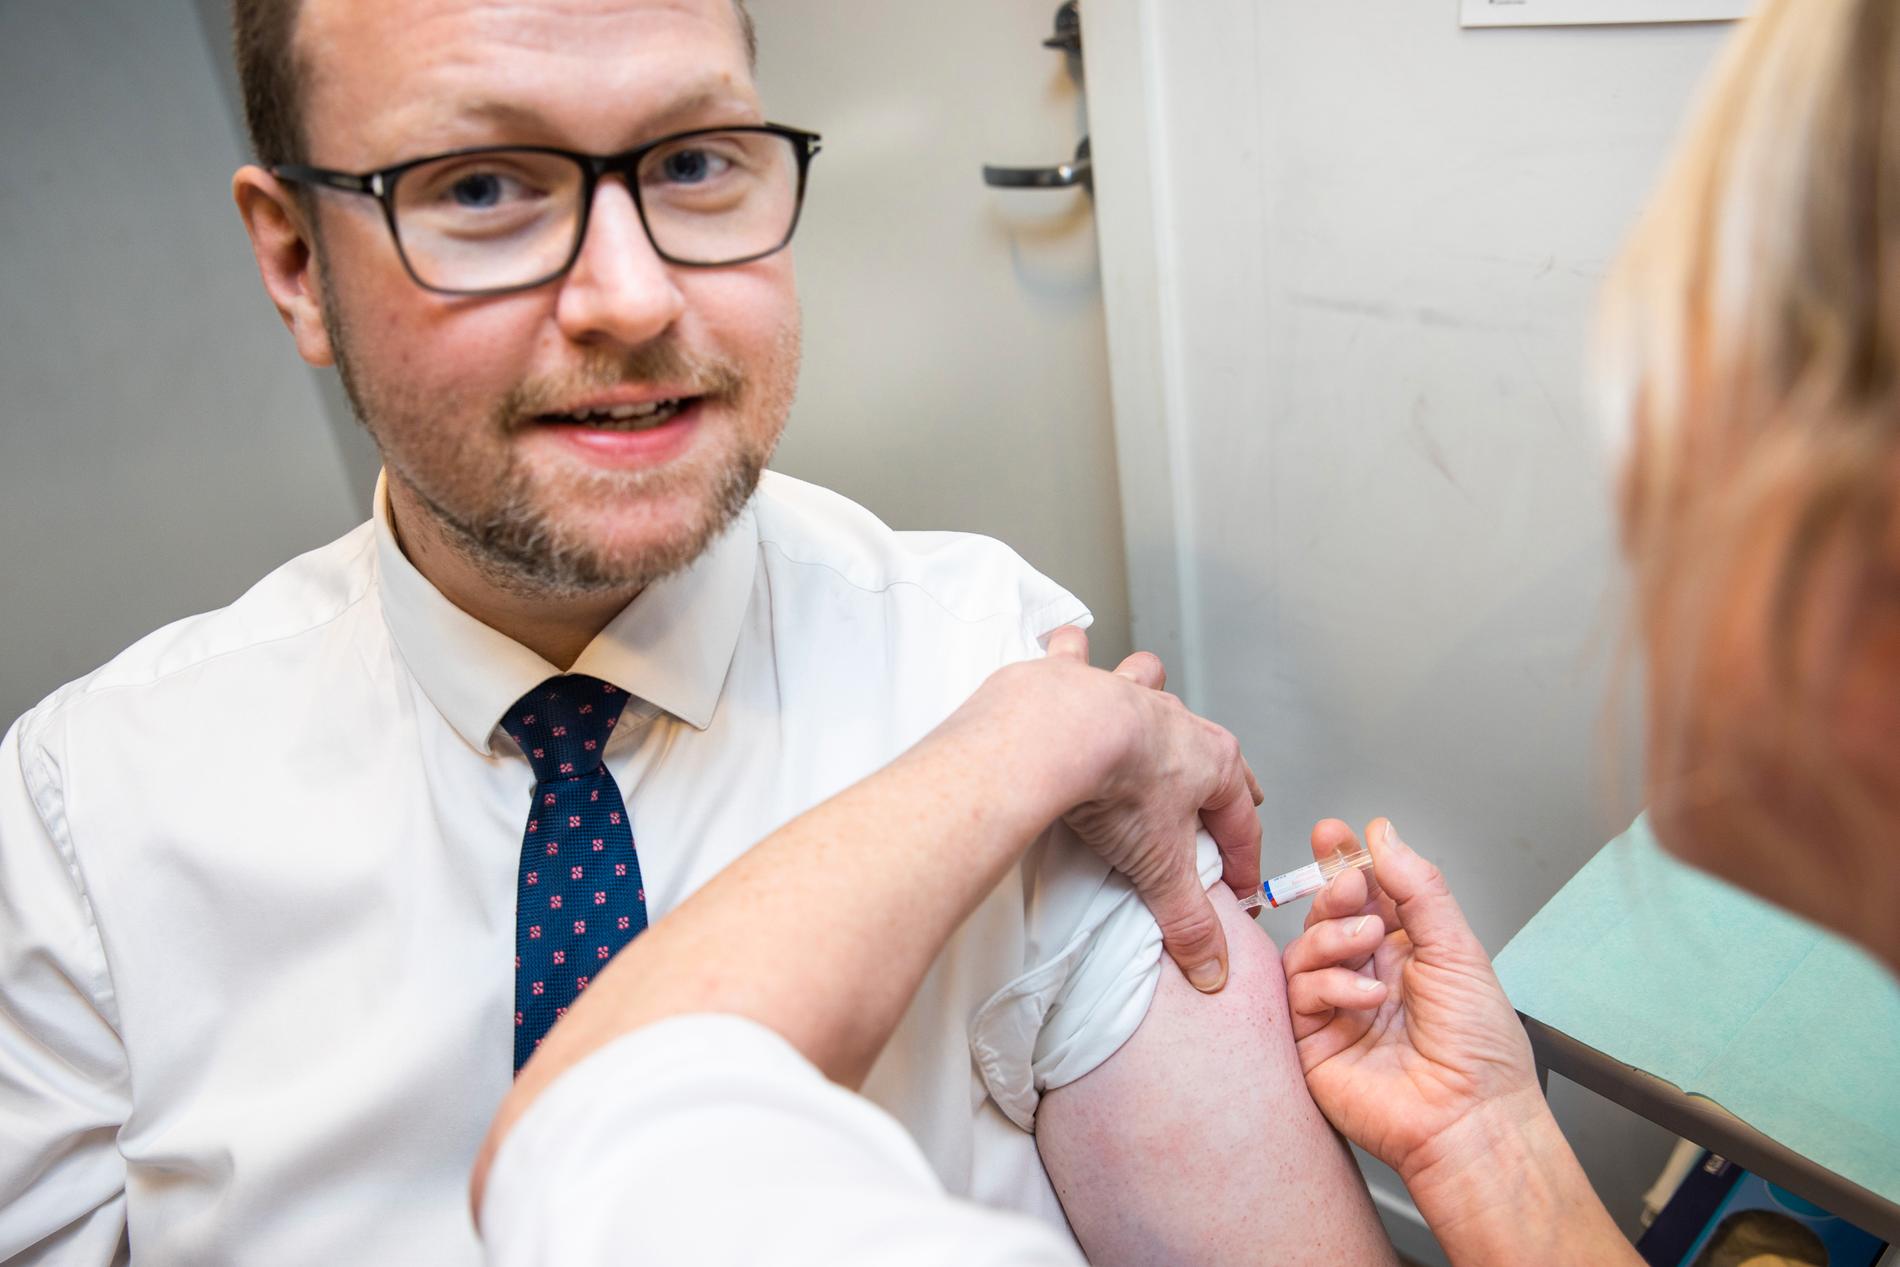 VACCINED MAN: Erlend Svardal Boy took VG when he was vaccinated earlier this year. 